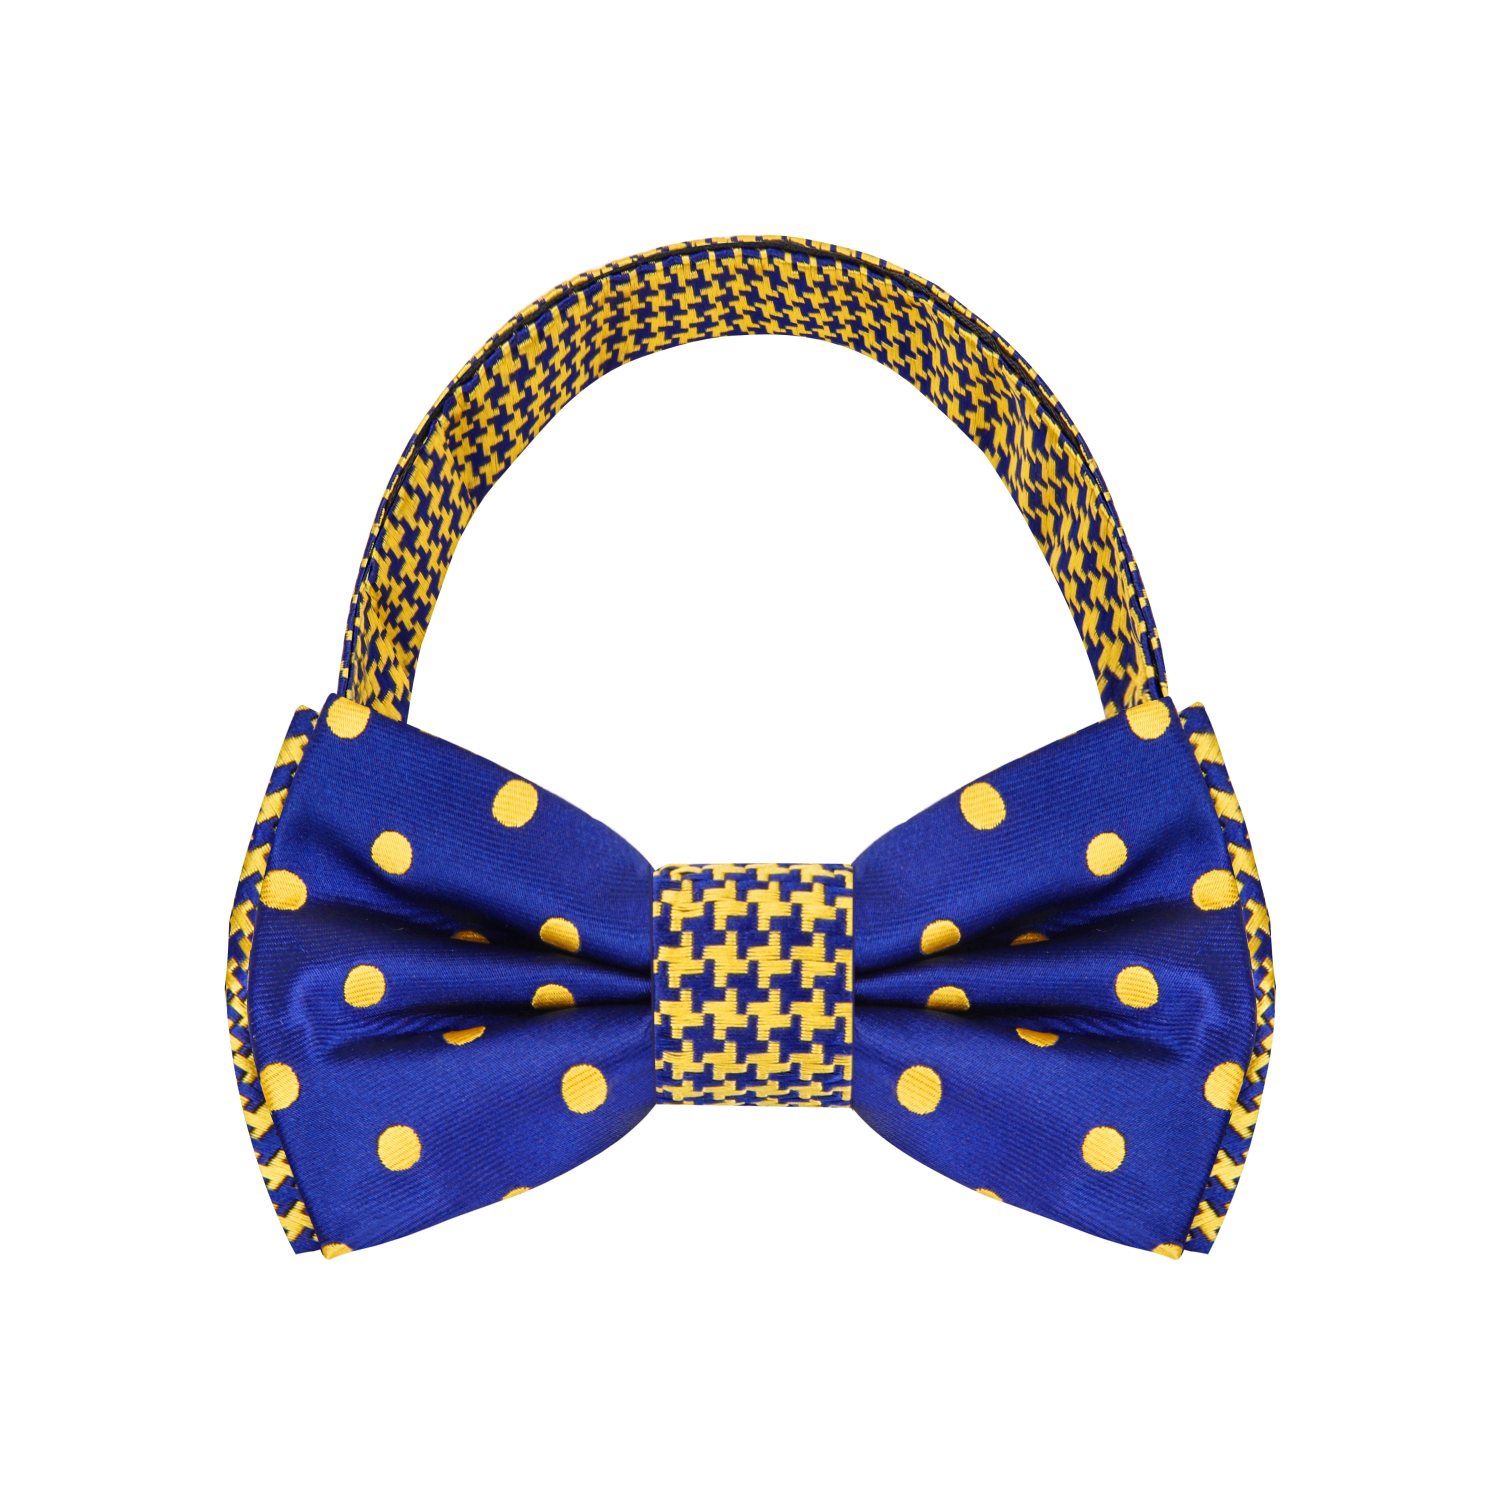 Blue, Gold Polka and Hounds Bow Tie Pre Tied